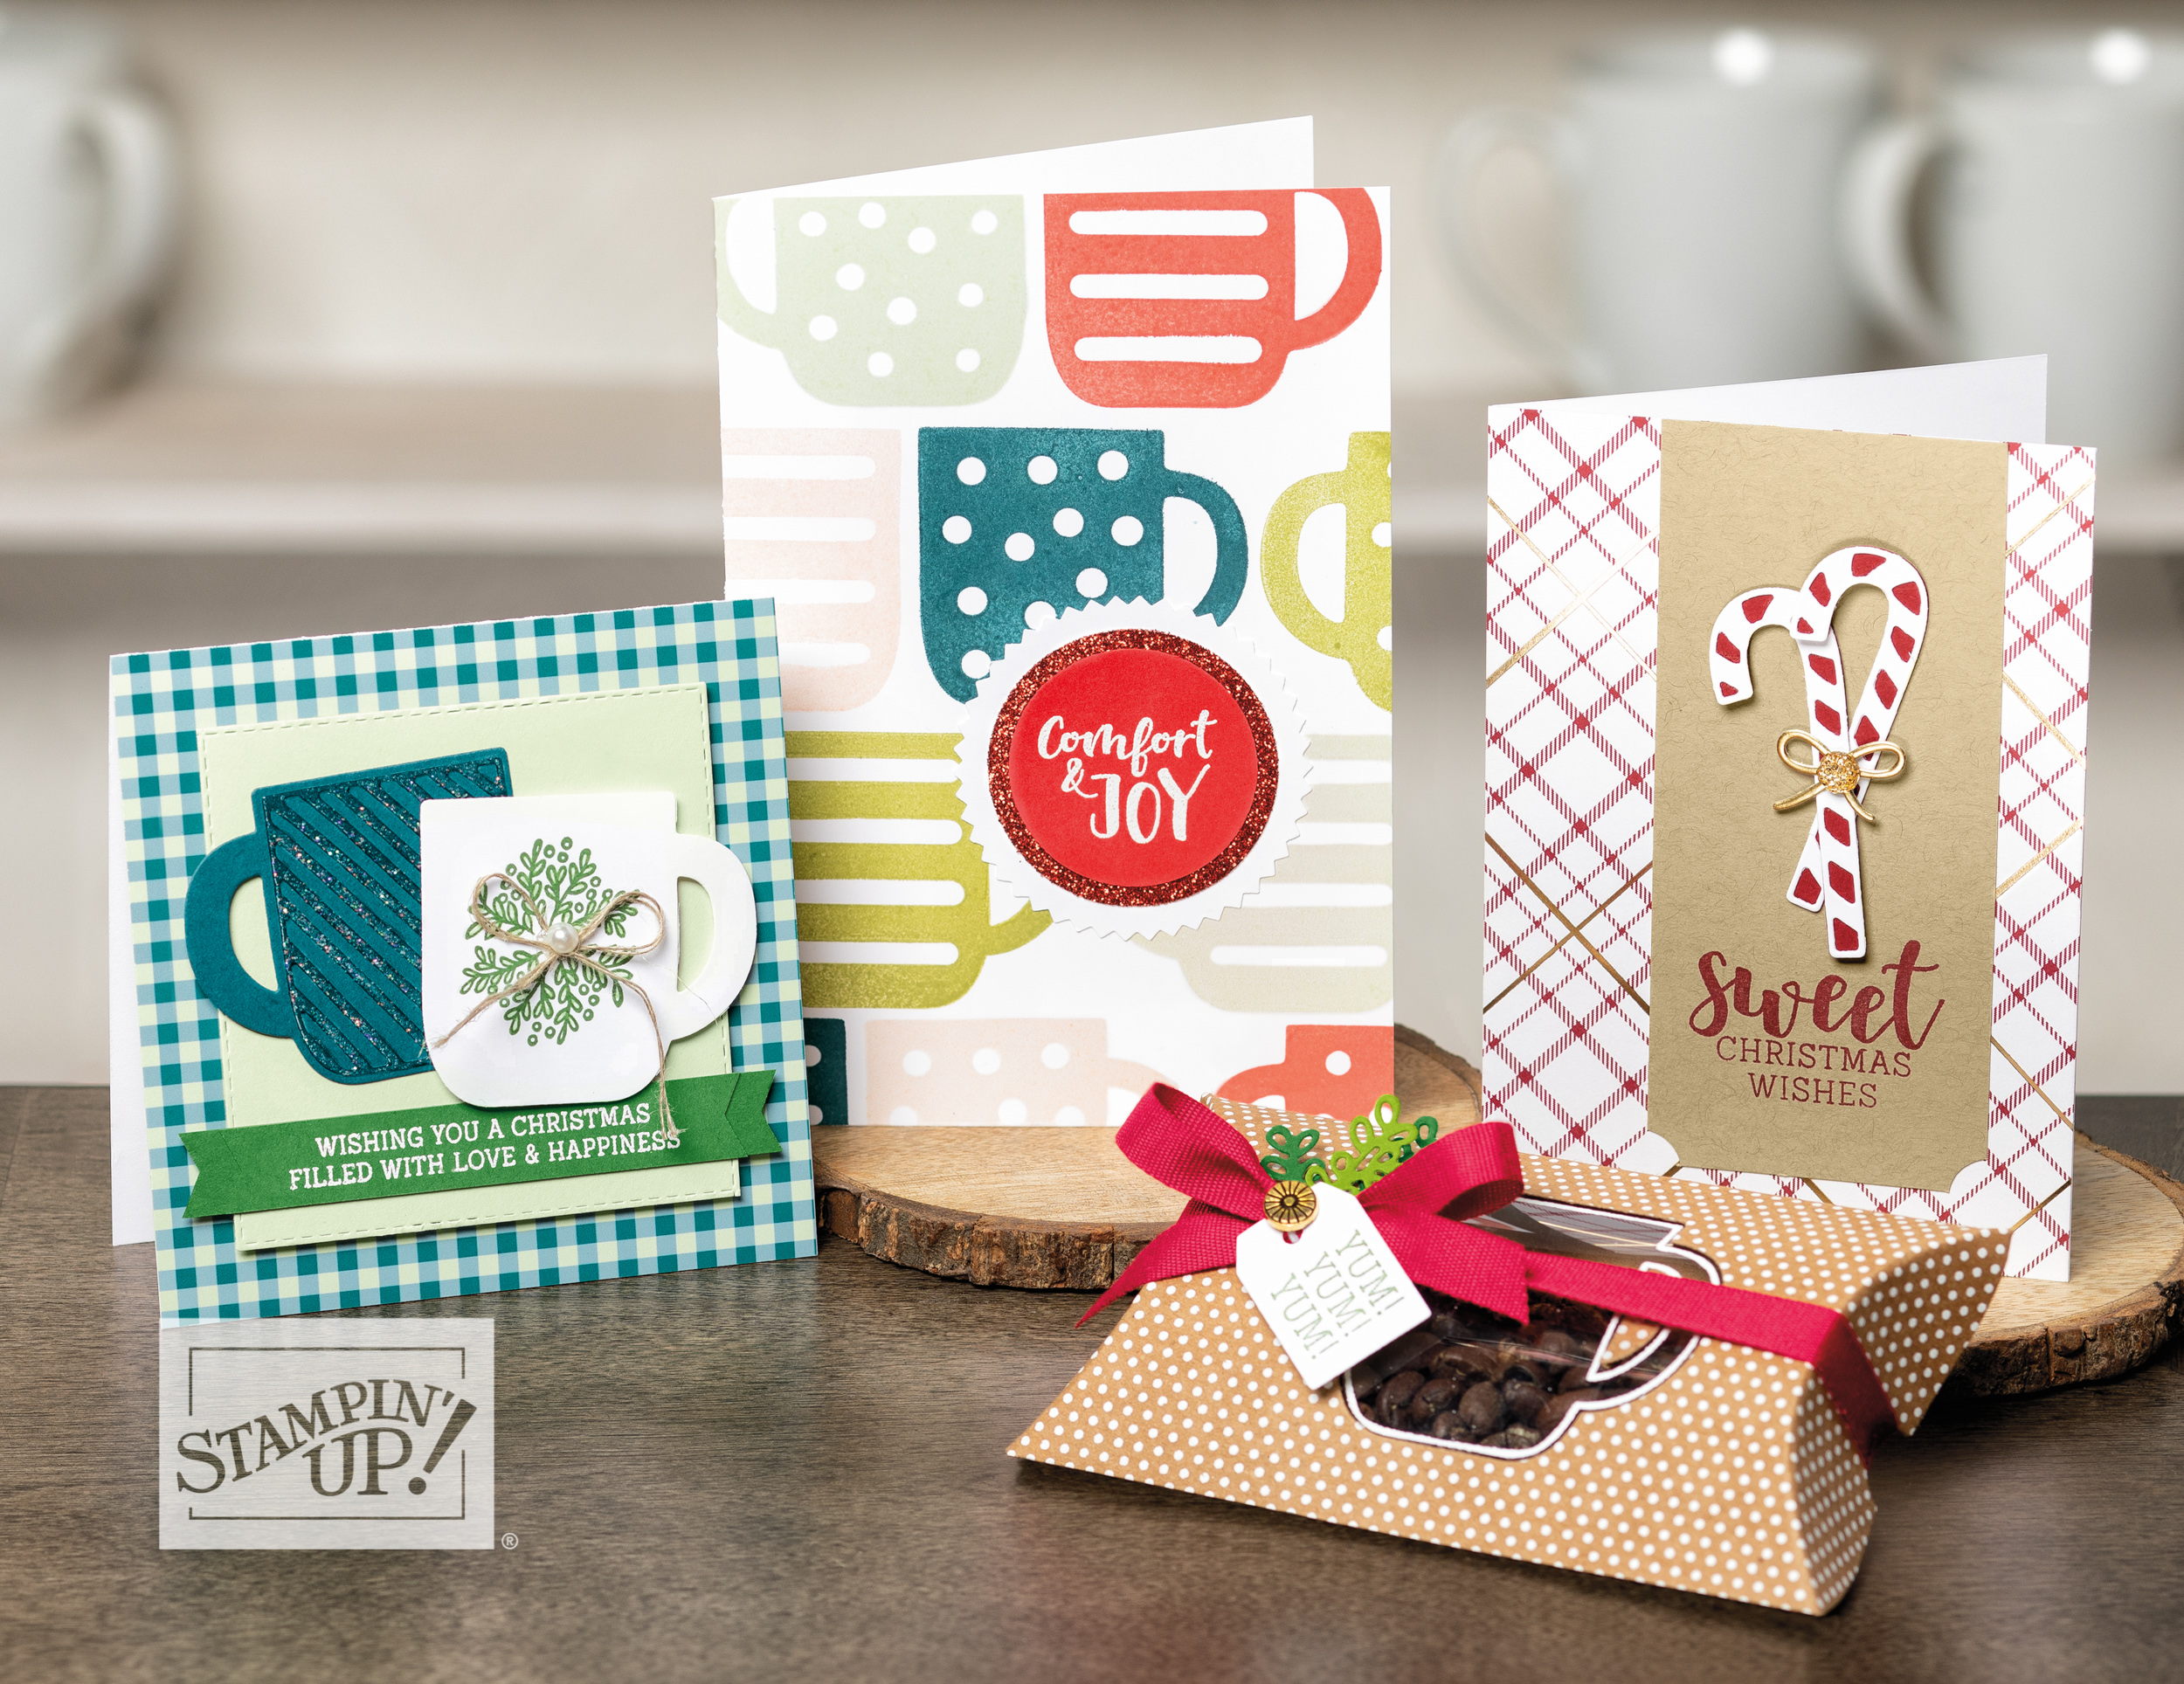 Cup Of Christmas by wendy lee, Stampin Up, #creativeleeyours, wendy lee, creatively yours, creative-lee yours, stamping, paper crafting, patternpaper, celebration, paper crafts, handmade, treats, SU, holiday, 3D, gifts, rubber stamps, crafts, holiday, Christmas, cup of christmas stamp set, mugs, cups, candy cane, cards, tags, holly